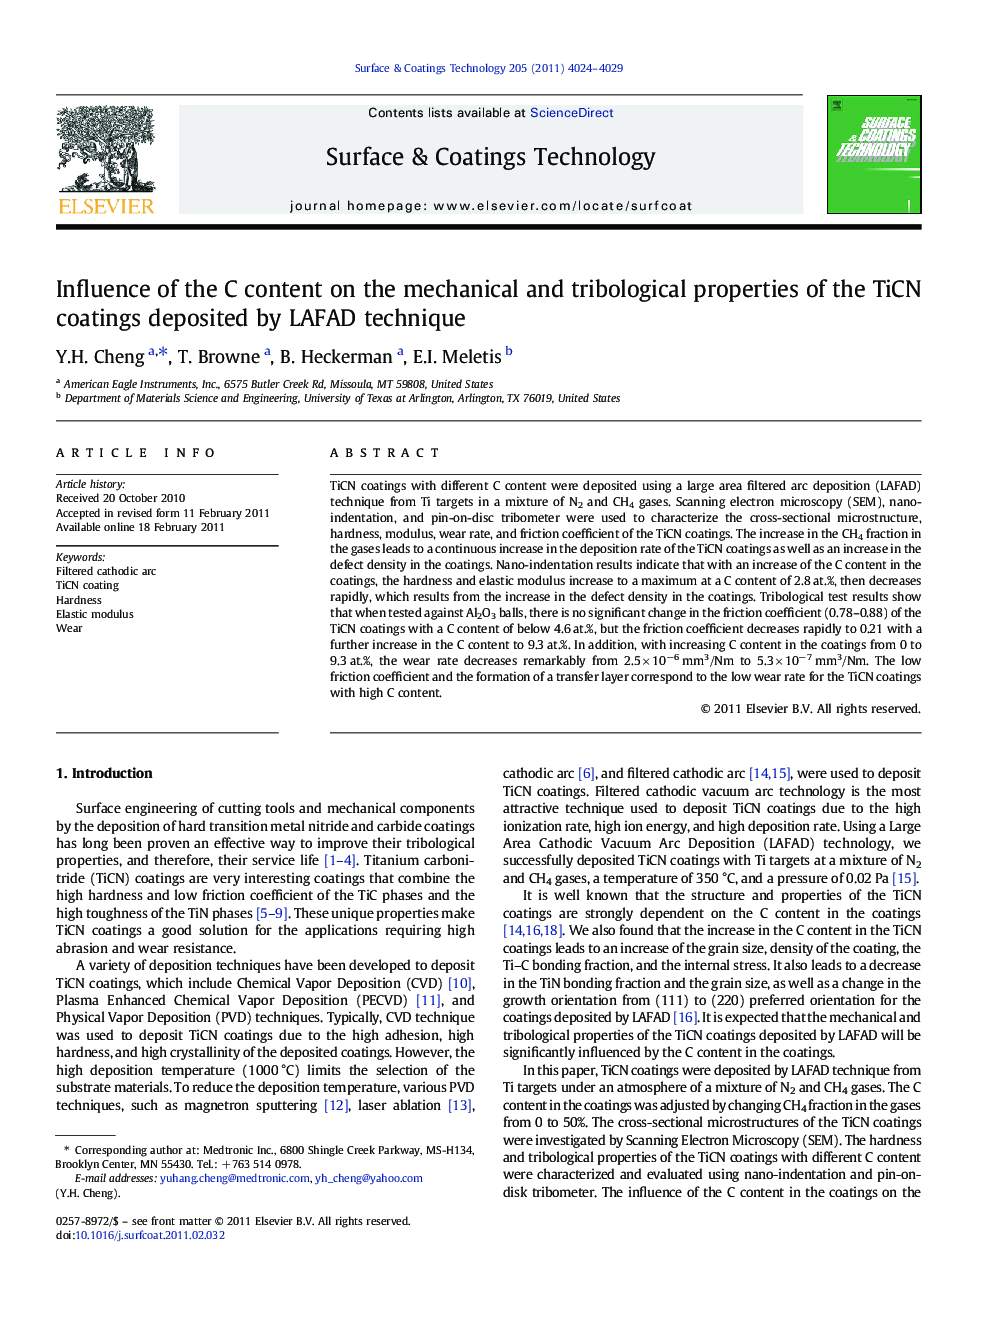 Influence of the C content on the mechanical and tribological properties of the TiCN coatings deposited by LAFAD technique